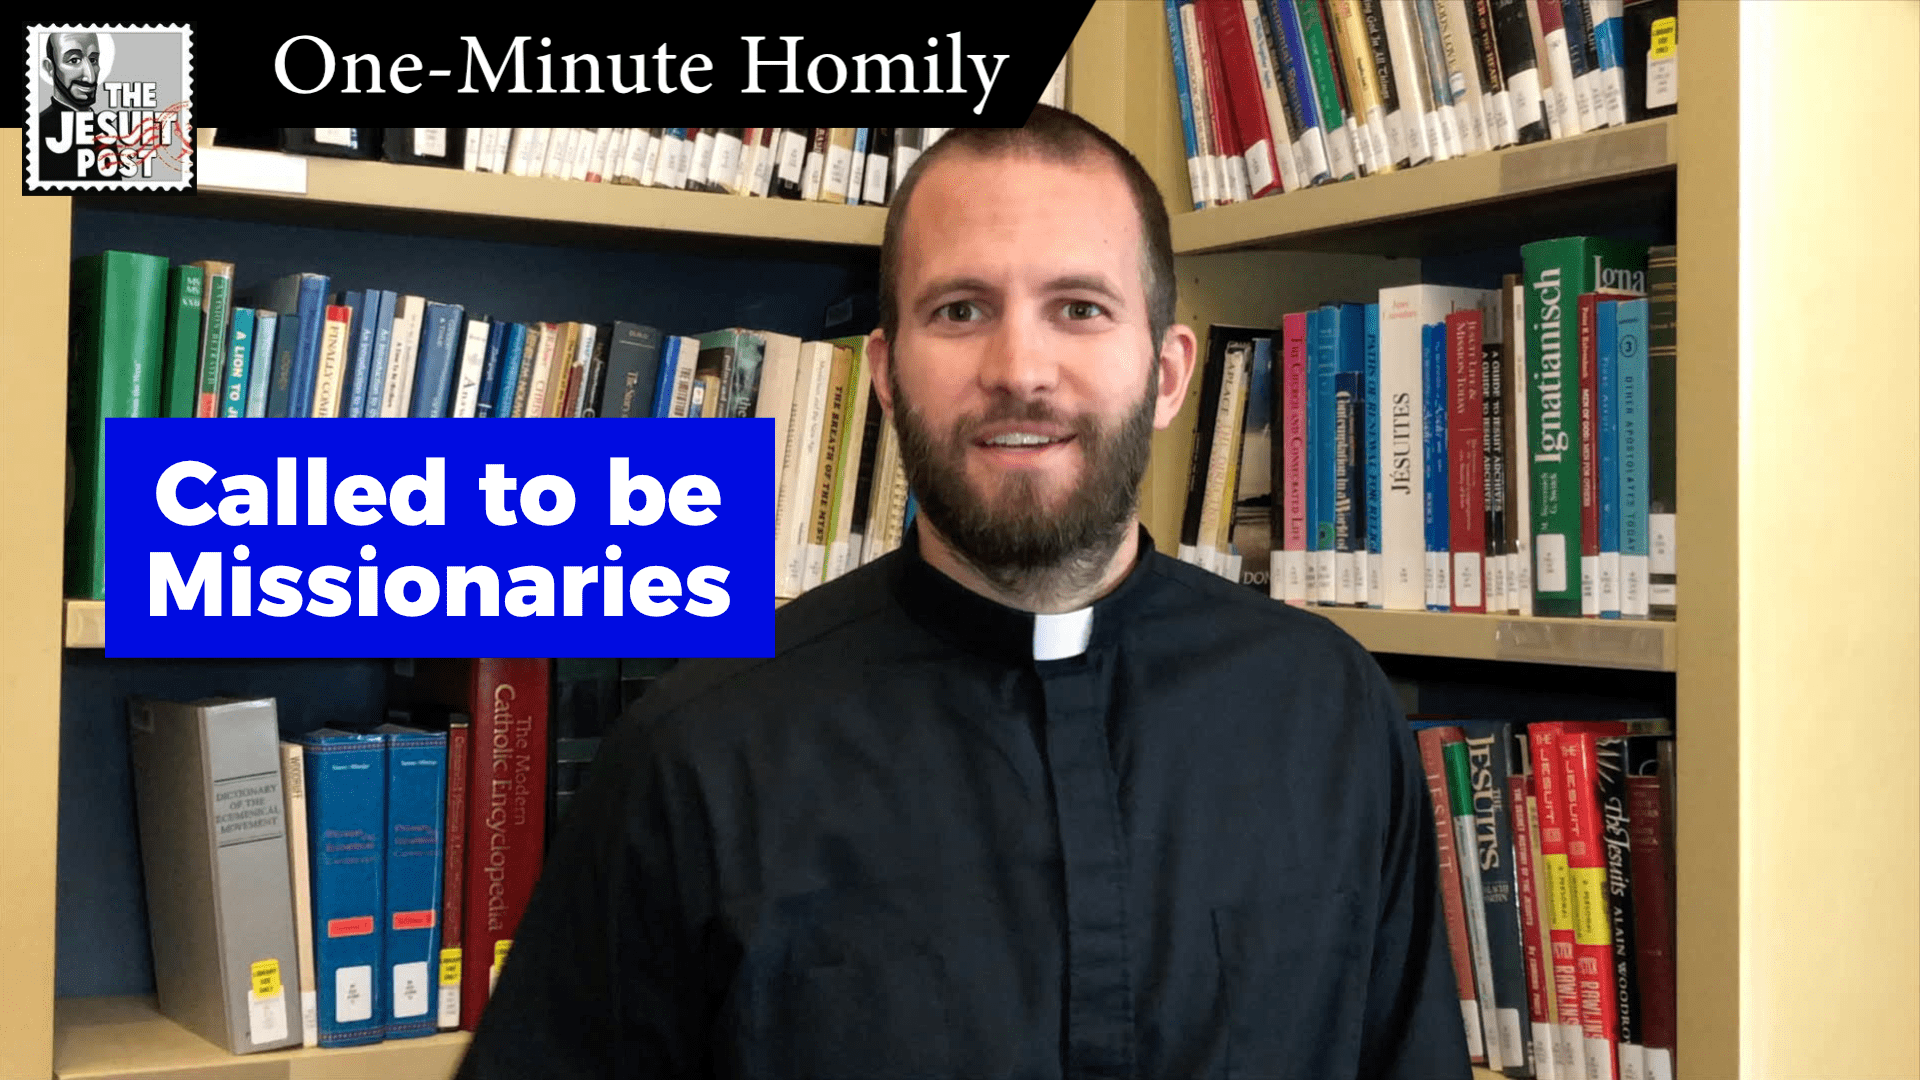 One-Minute Homily: “Called to be Missionaries”